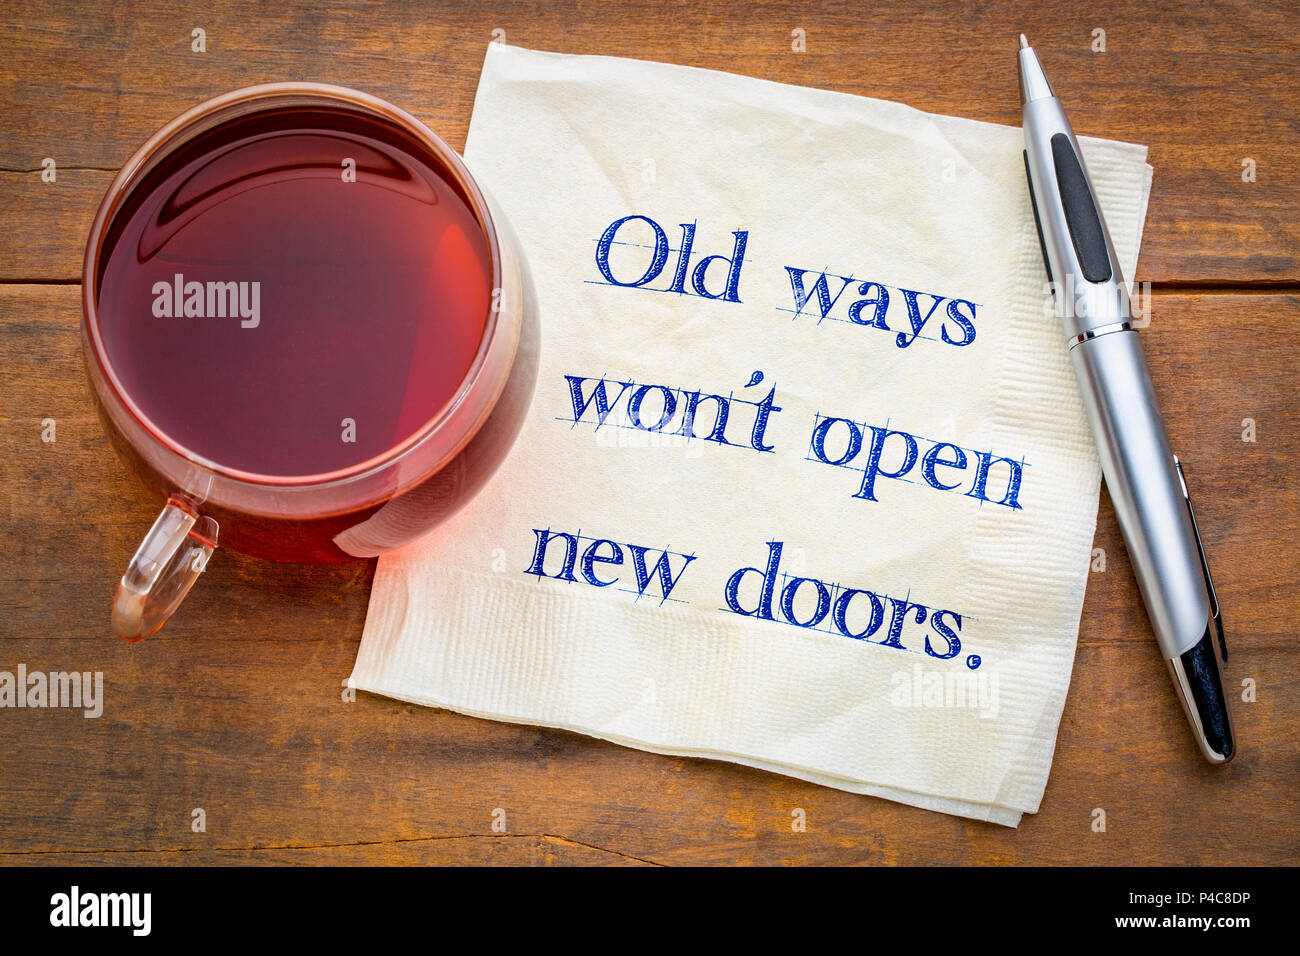 Old ways will not open new doors - handwriting on a napkin with a cup of tea. Stock Photo